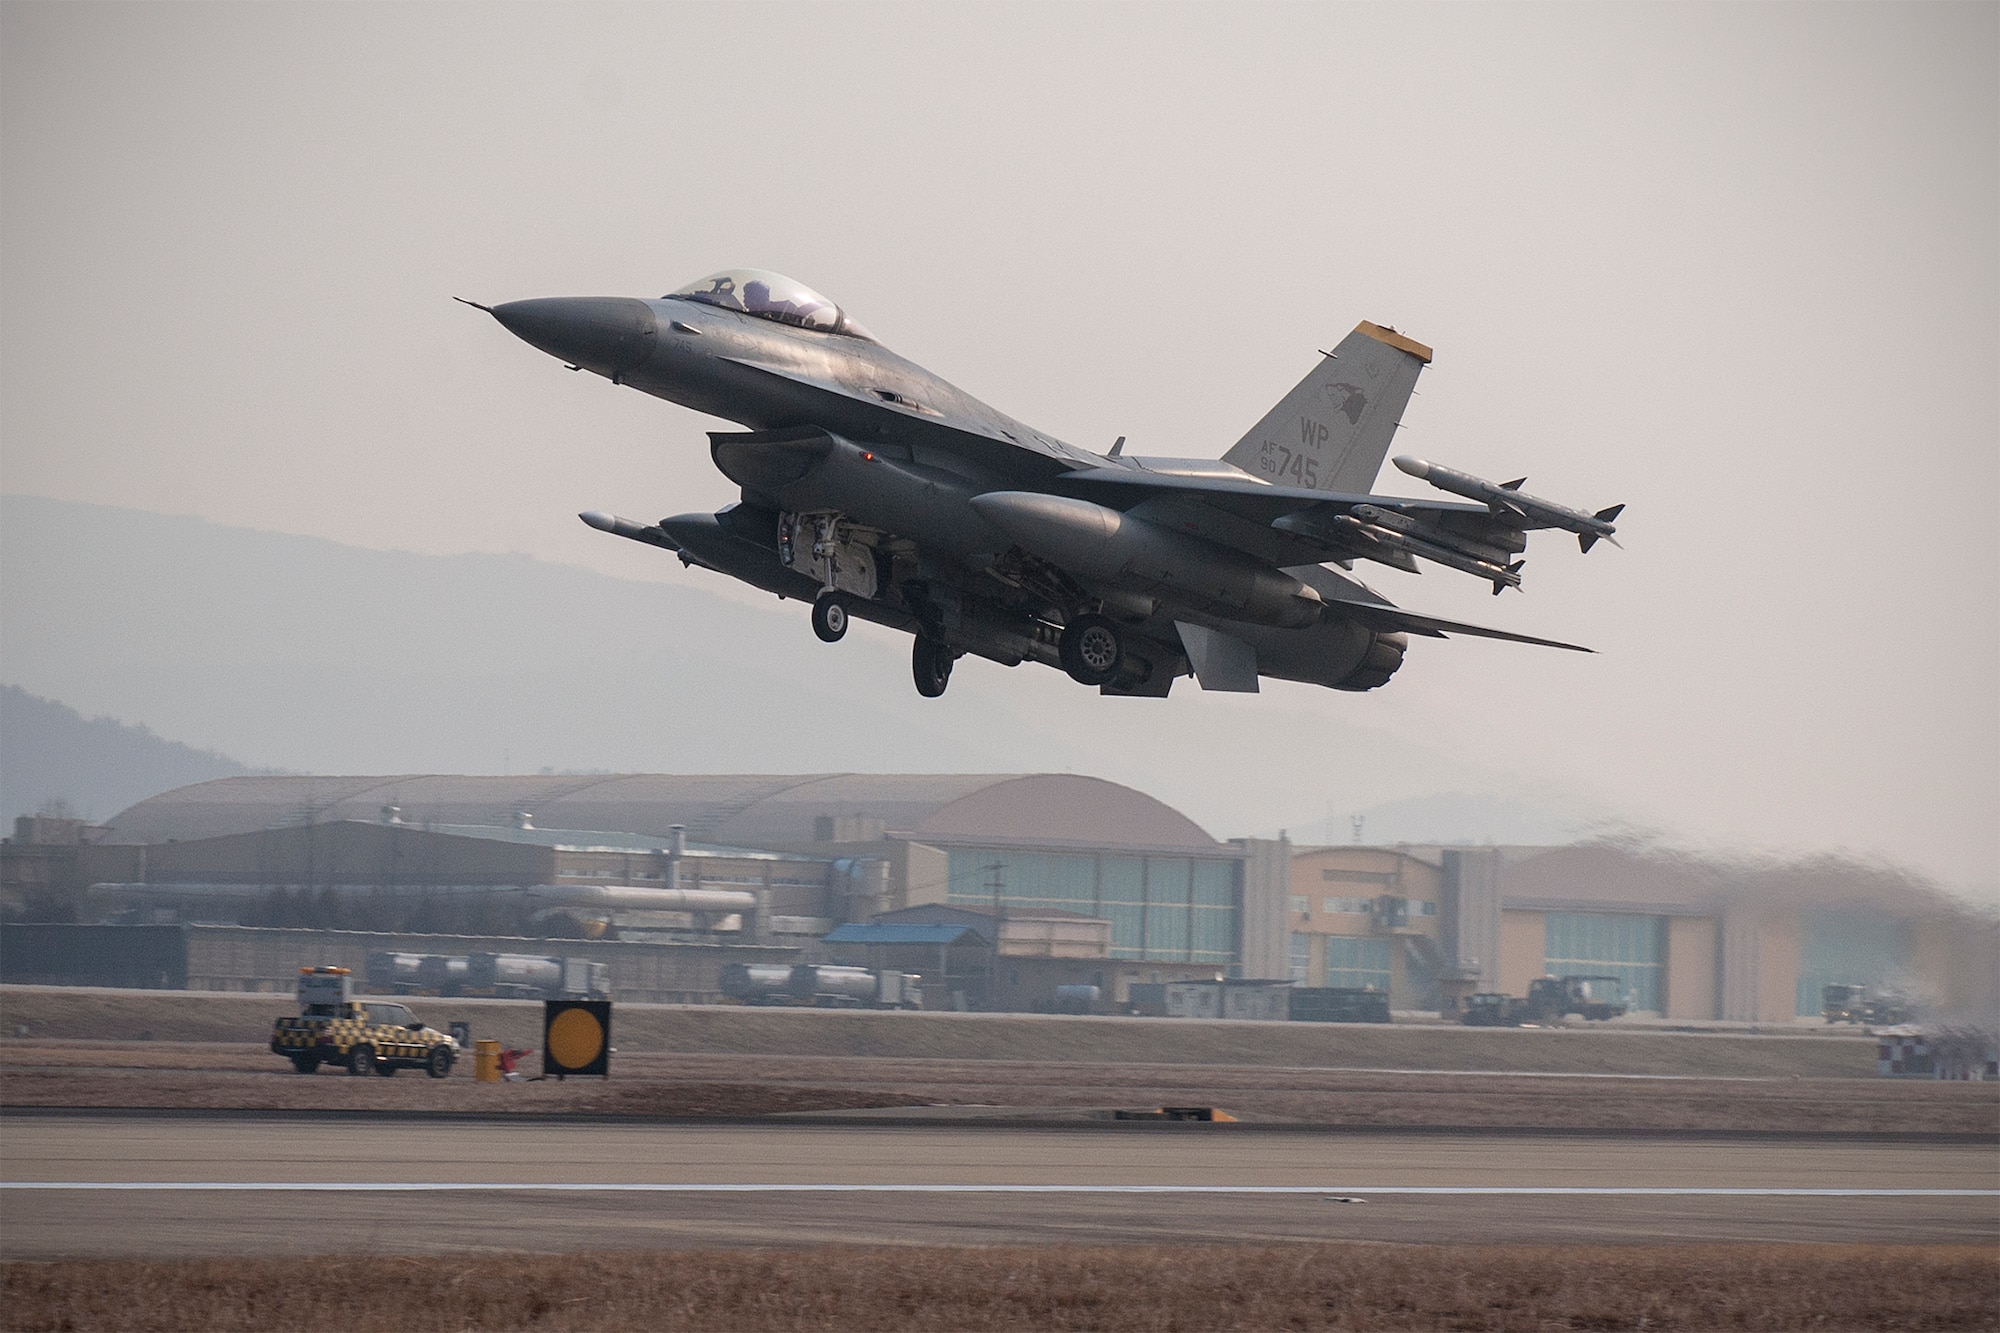 An F-16 Fighting Falcon from the 8th Fighter Wing takes off during exercise Buddy Wing 15-2 Feb. 5, 2015, at Daegu Air Base, South Korea. Buddy Wing exercises are held multiple times a year to enhance interoperability between  the U.S. and South Korean air forces, promote cultural awareness; and integrate mission planning, briefing, flying and debriefing. (U.S. Air Force photo/Senior Airman Katrina Heikkinen)